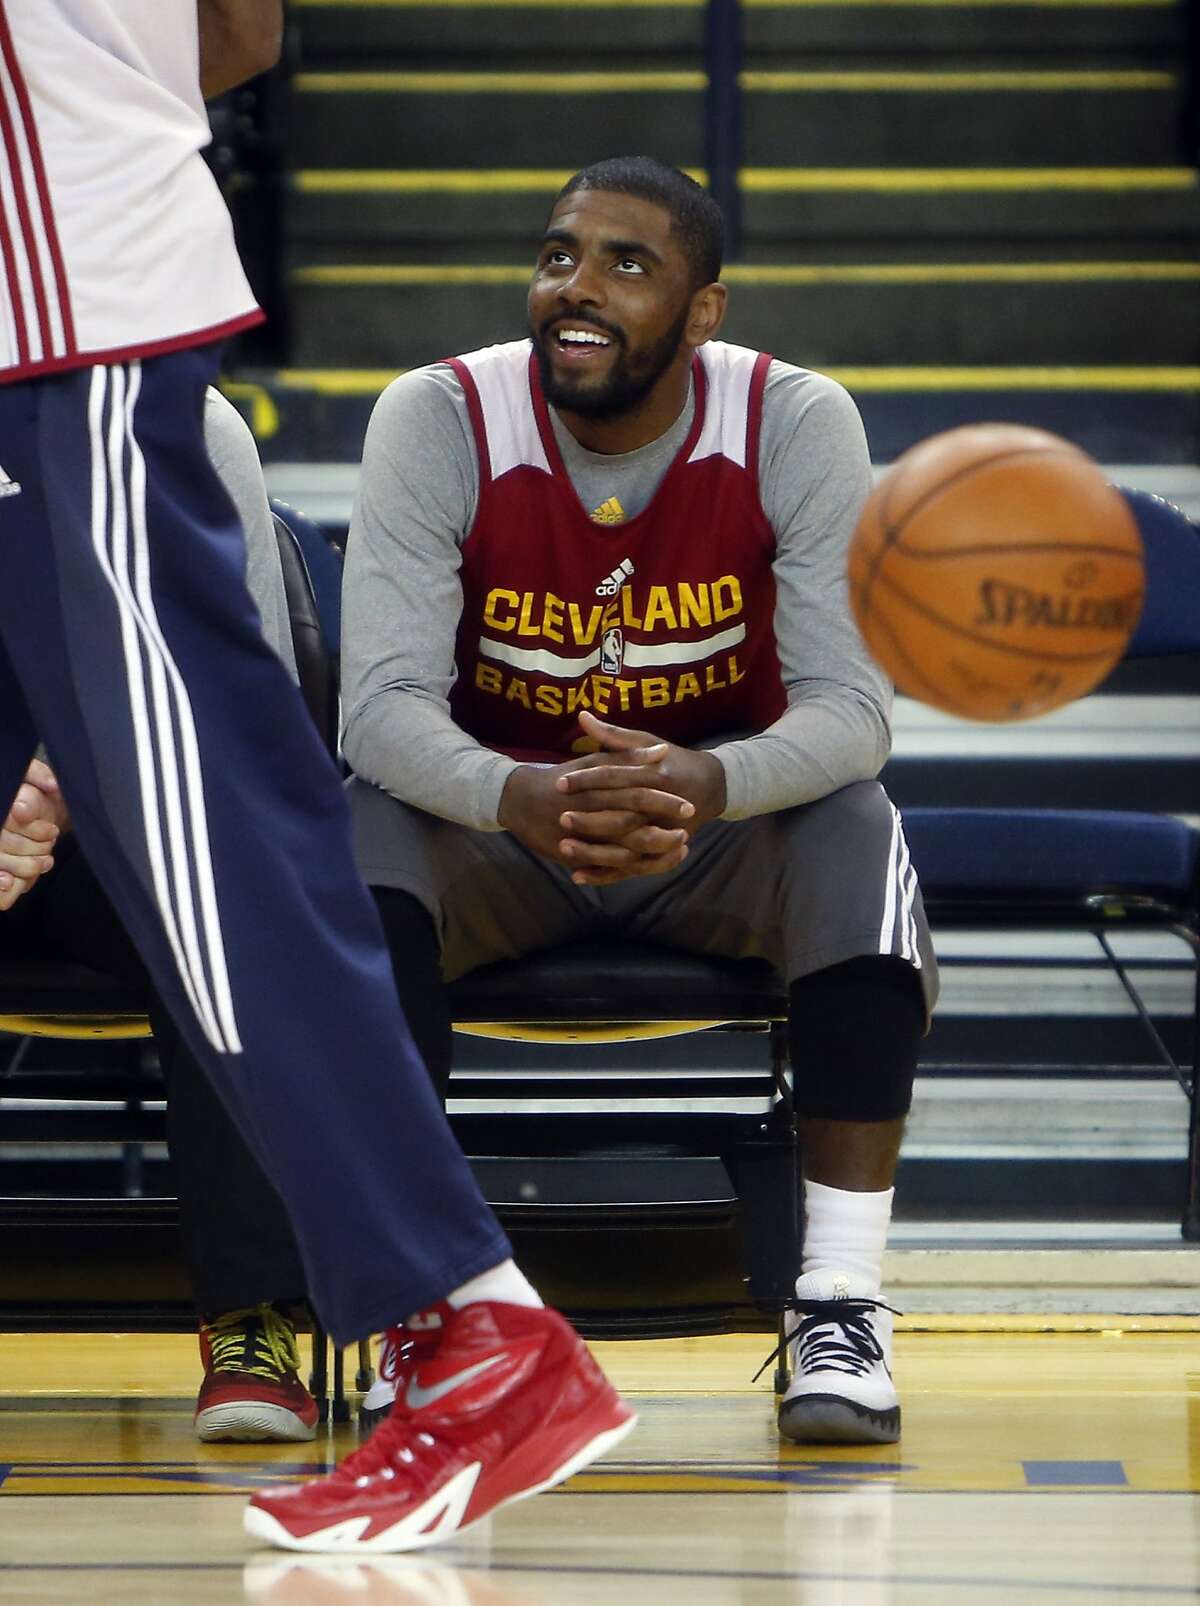 Cleveland Cavaliers' Kyrie Irving watches practice at Oracle Arena in Oakland, Calif., on Wednesday, June 3, 2015.